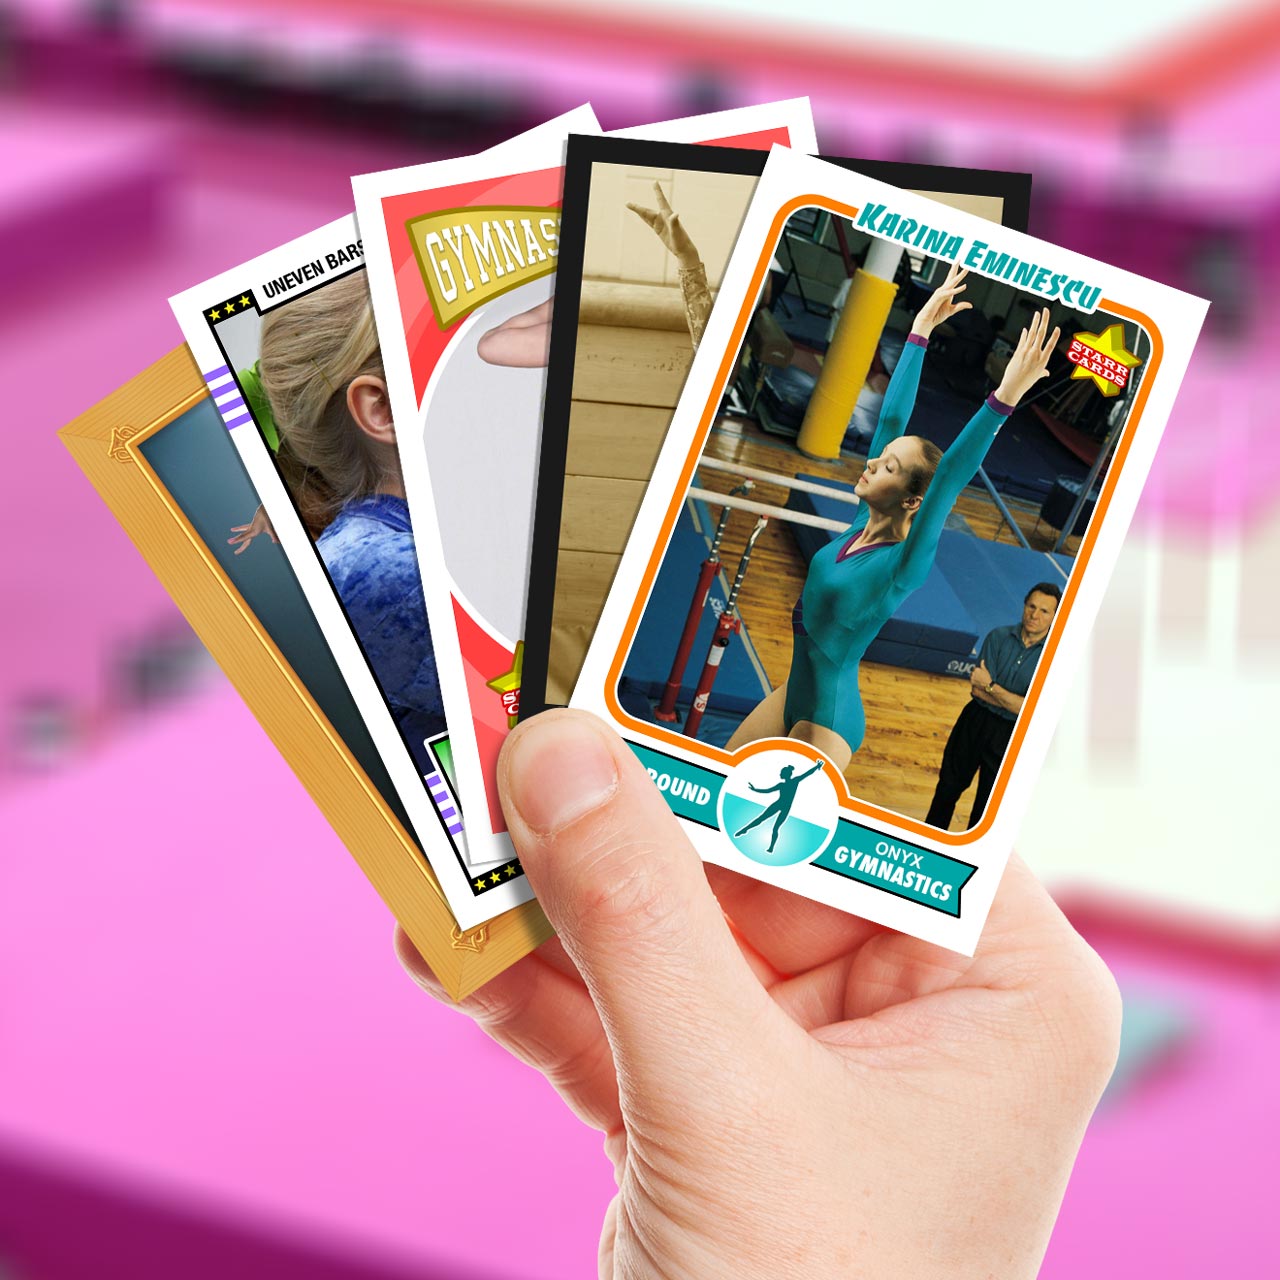 Make your own gymnastics card with Starr Cards.